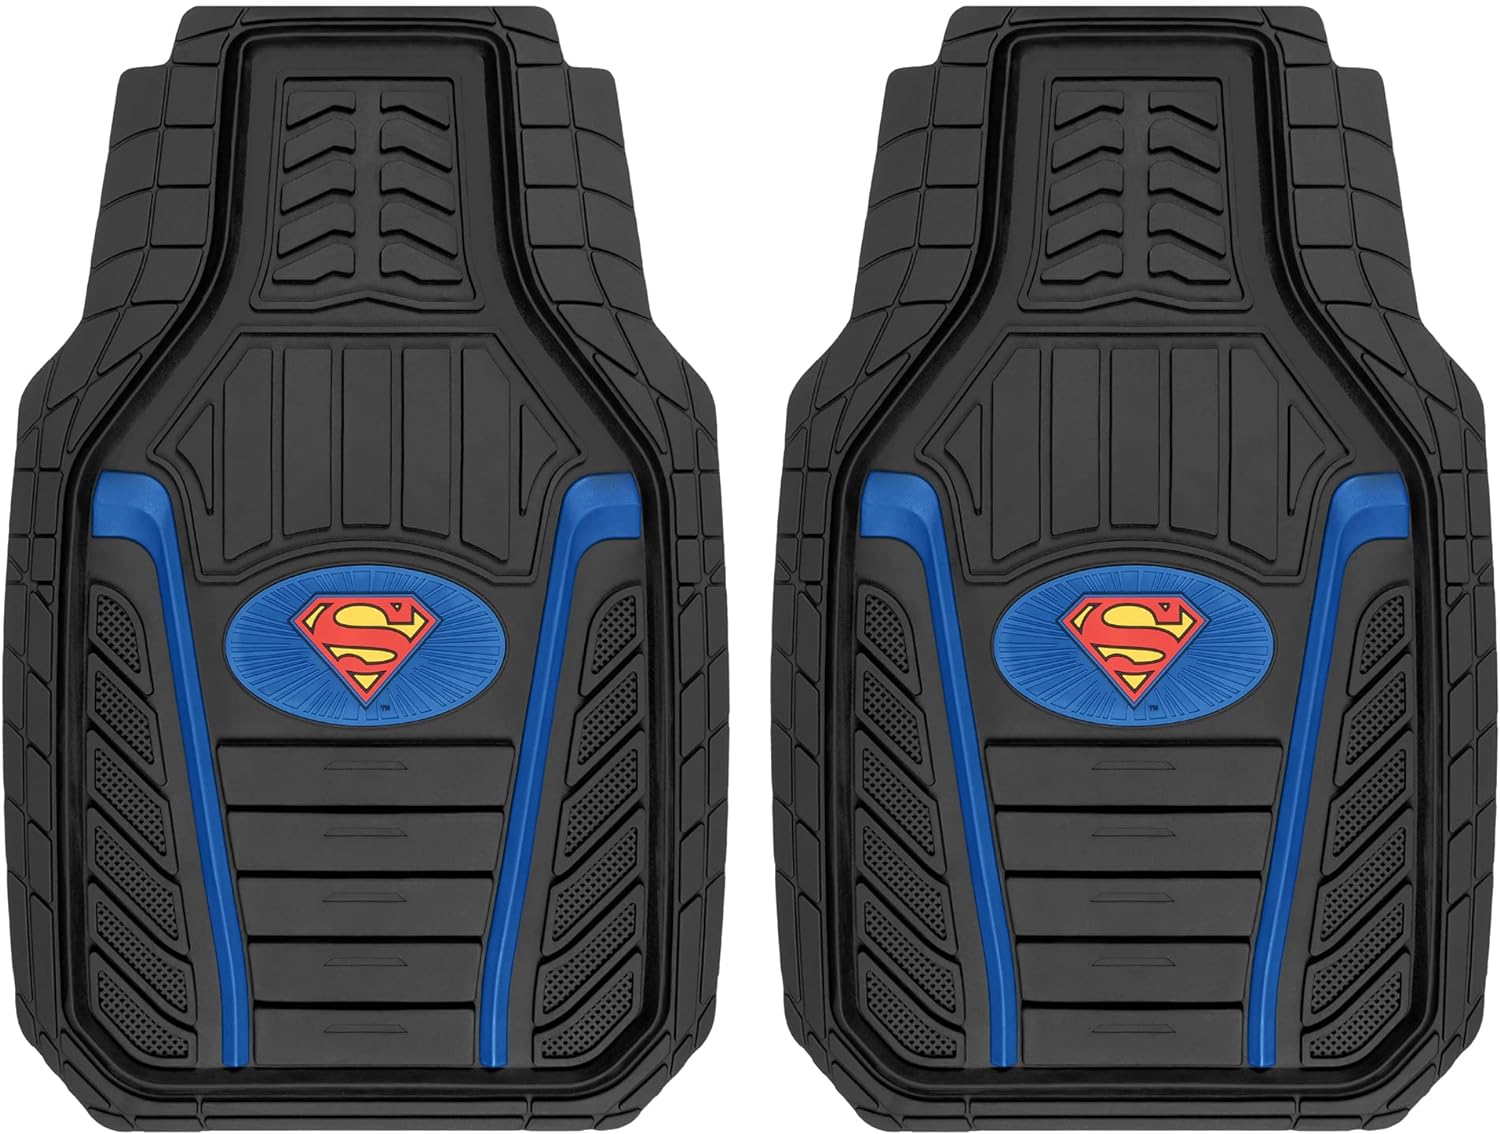 BDK Armored Super Hero Car Floor Mats - Officially Licensed DC Comics - All Weather Heavy Duty Auto Interior Liners for Car Truck Van SUV (Multiple Styles)